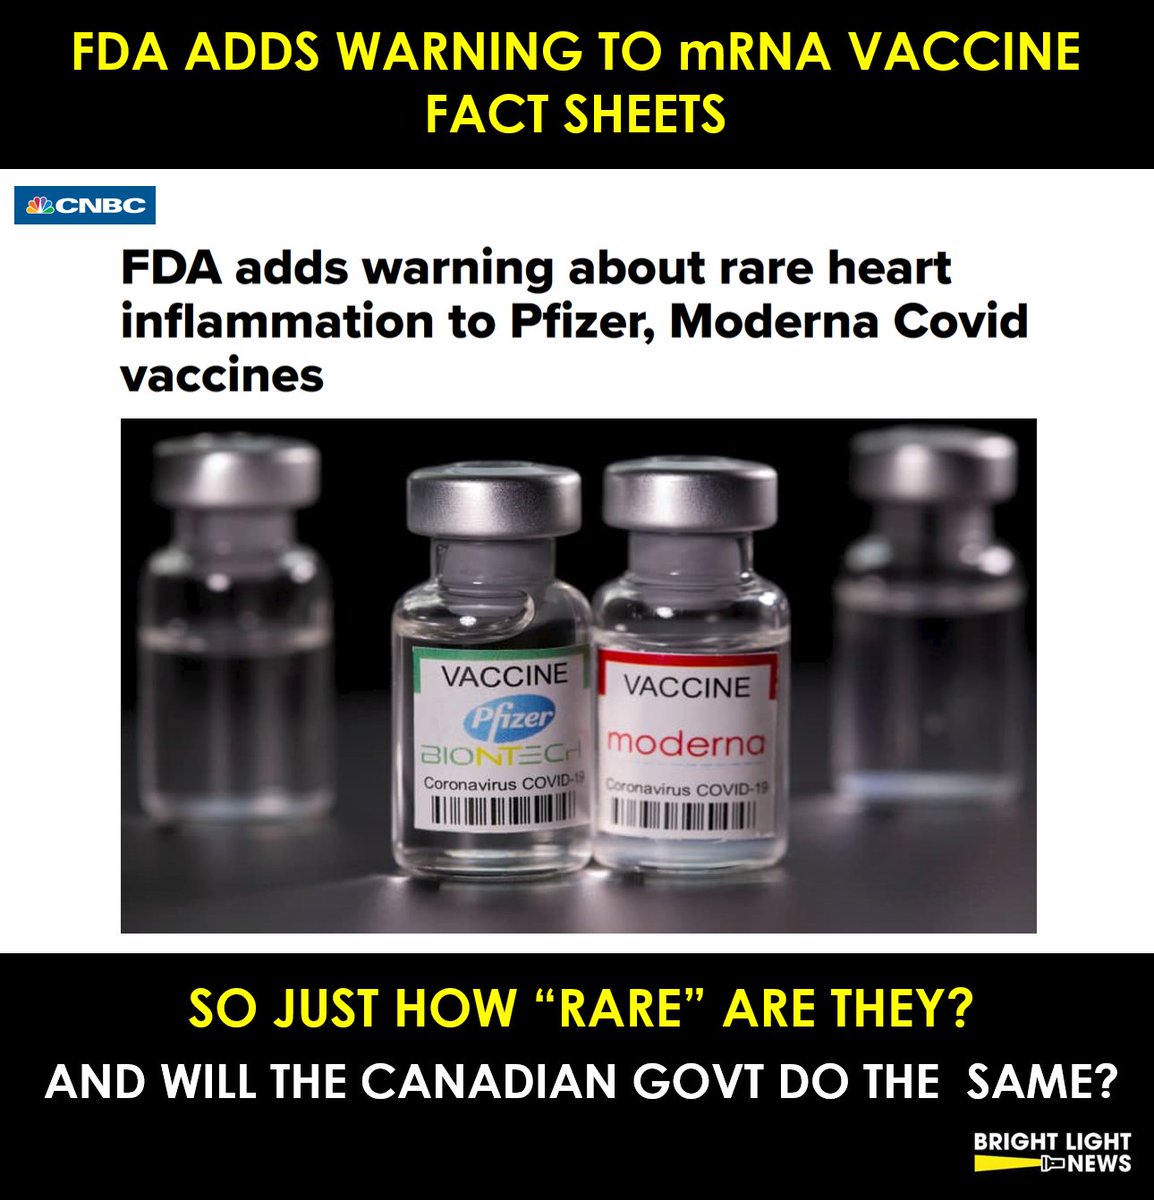 Heart inflammation no so 'rare,' as FDA adds warning to #Pfizer, #Moderna #CovidVaccine fact sheets. Why is the Canadian govt & media silent on this? @cpso_ca @OnCall4ON @dockaurG @DrP_MD @CanAditude @FatEmperor Article: cnbc.com/2021/06/26/fda…